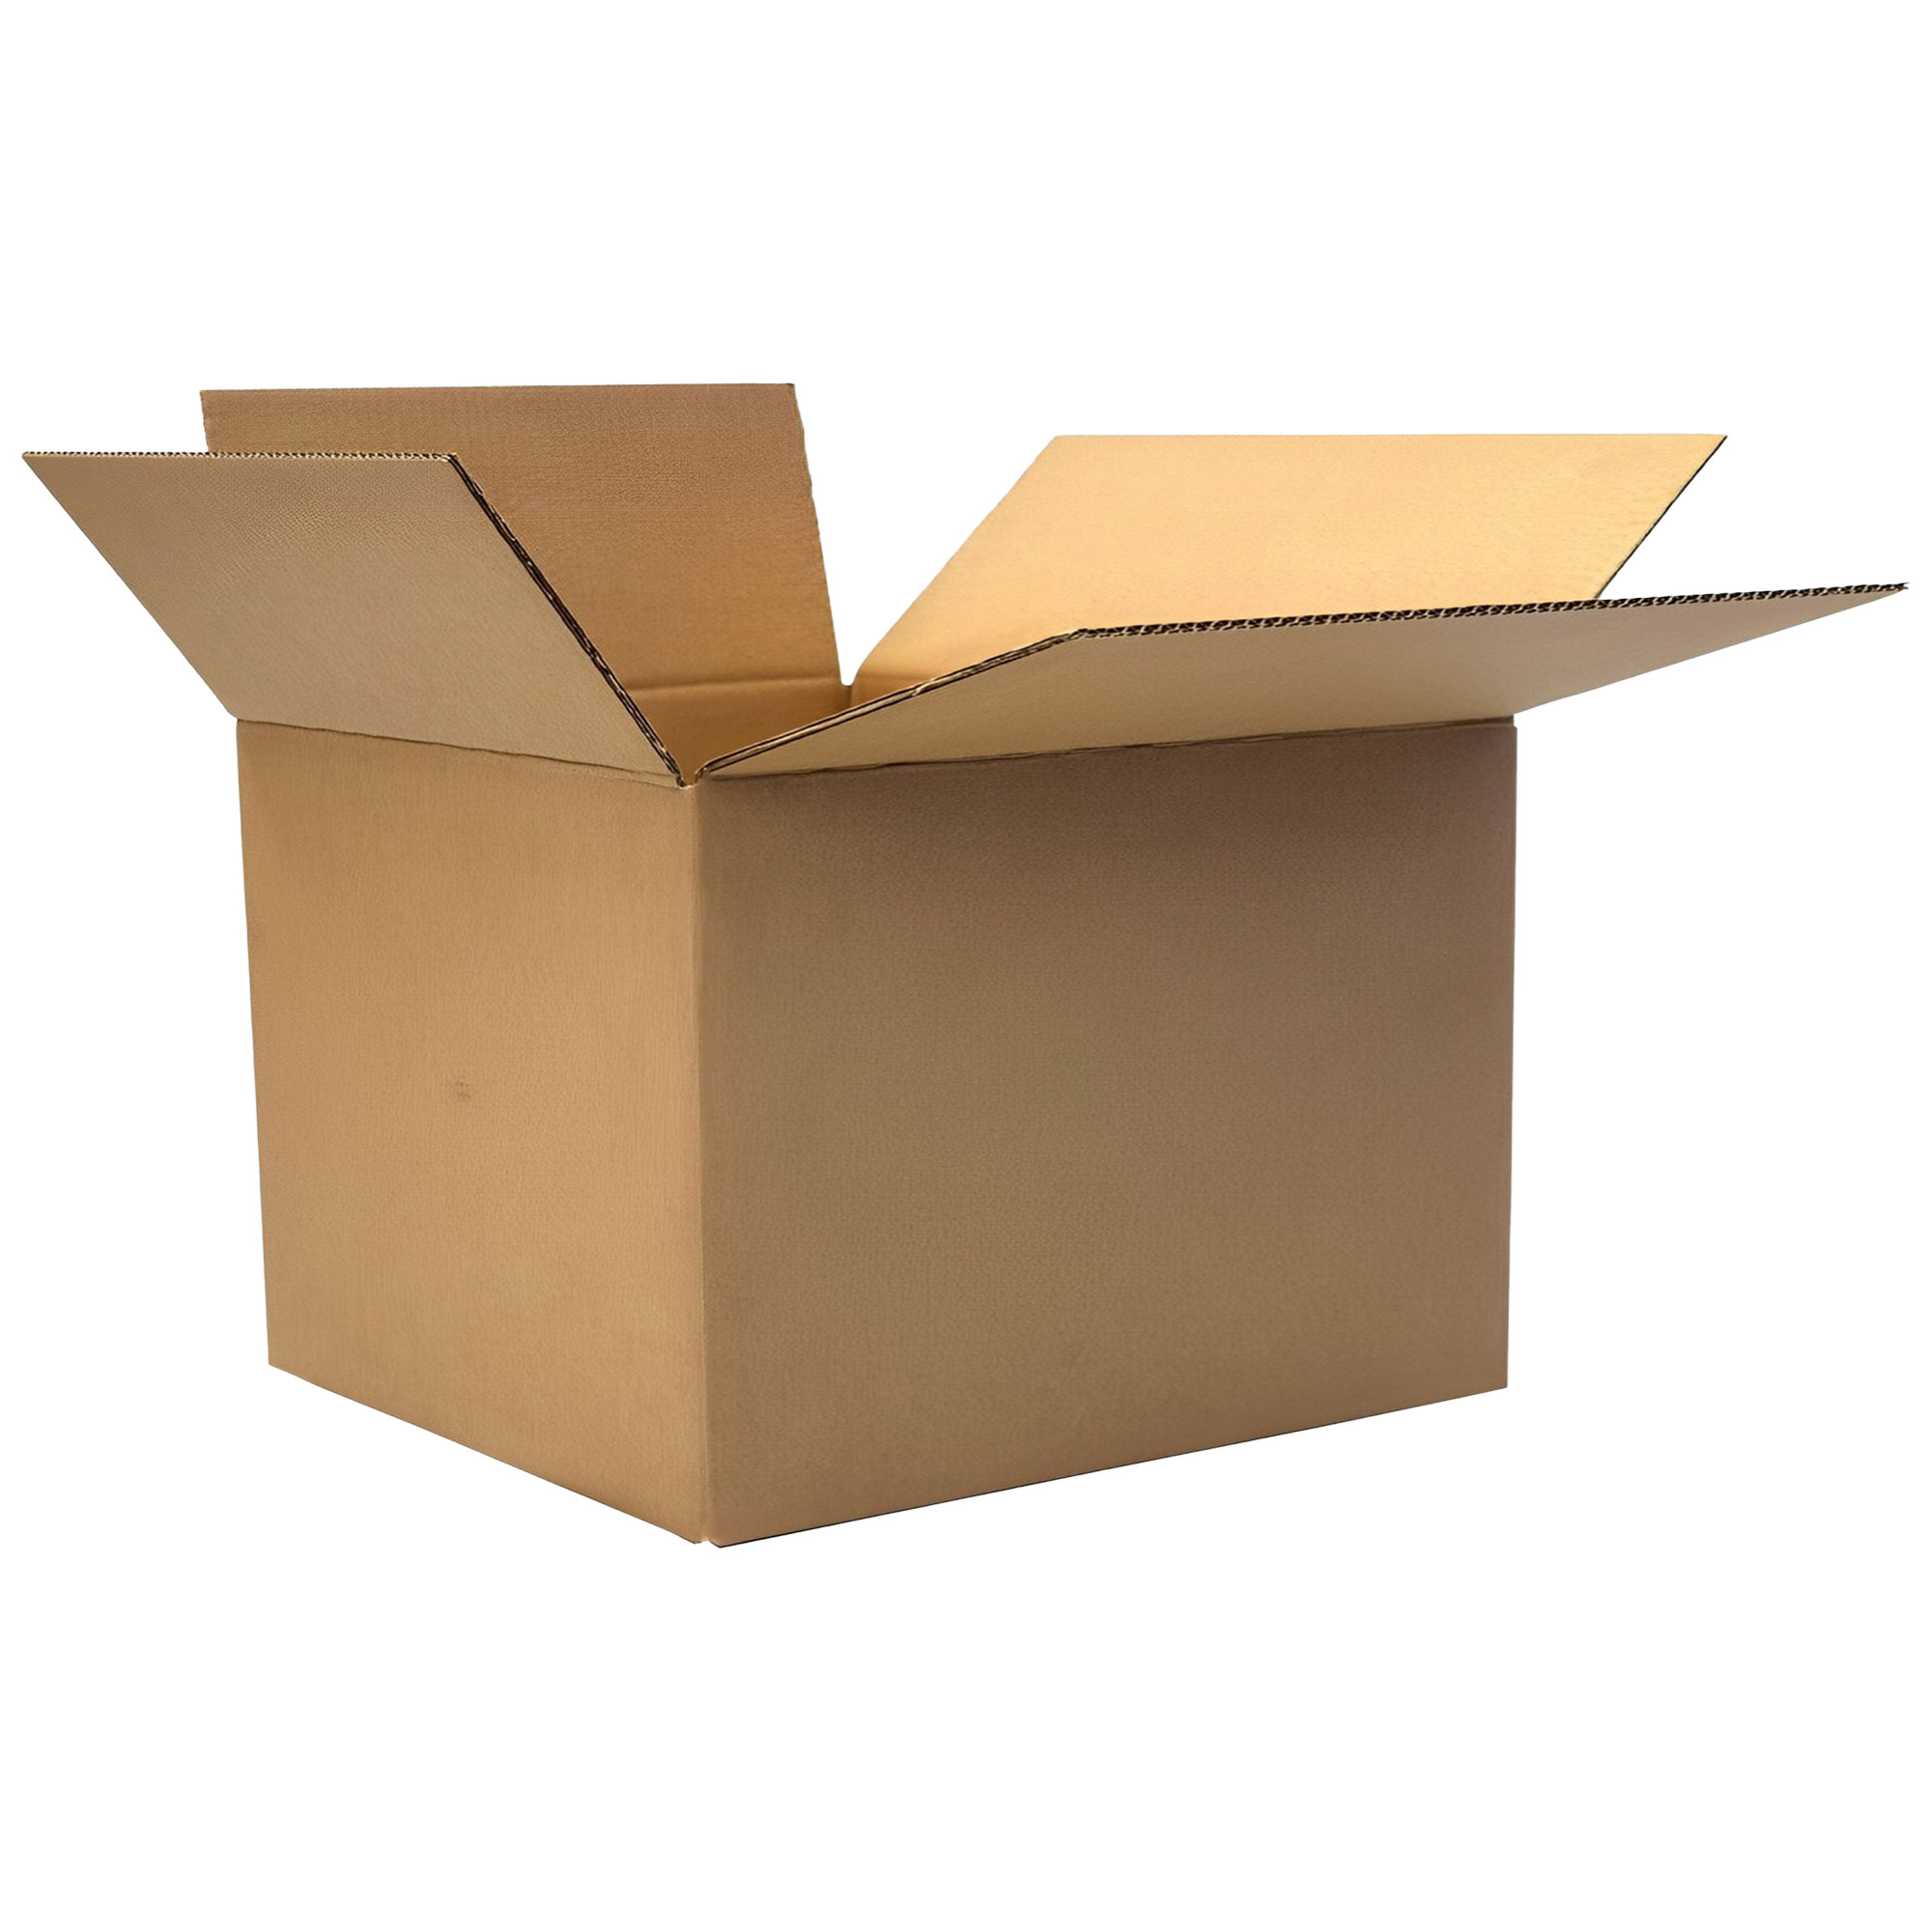 Kuber Industries Corrugated Box | 5 Ply Corrugated Packing Box | Corrugated for Shipping | Corrugated for Courier & Goods Transportation | L 30 x W 23.7 x H 19.7 Inch | Brown